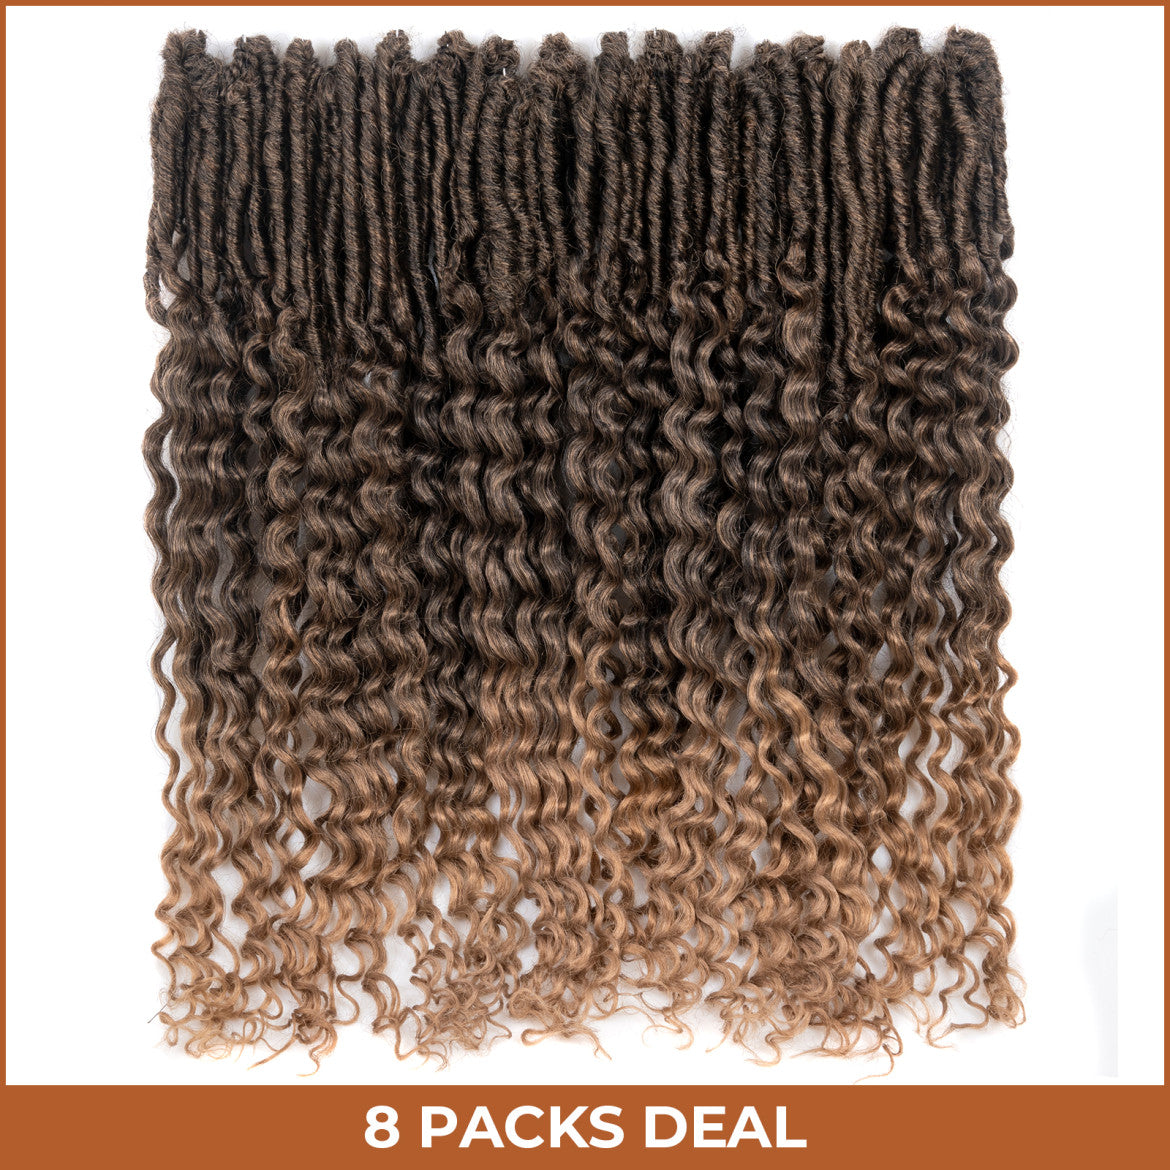 TOYOTRESS UNIQUE DEEP WAVE LOCS CROCHET | CROCHET FRENCH LOCS WITH LONG CURLY ENDS CROCHET HAIR PRE LOOPED DEEP WAVE LOCS BRAIDING HAIR FOR WOMEN